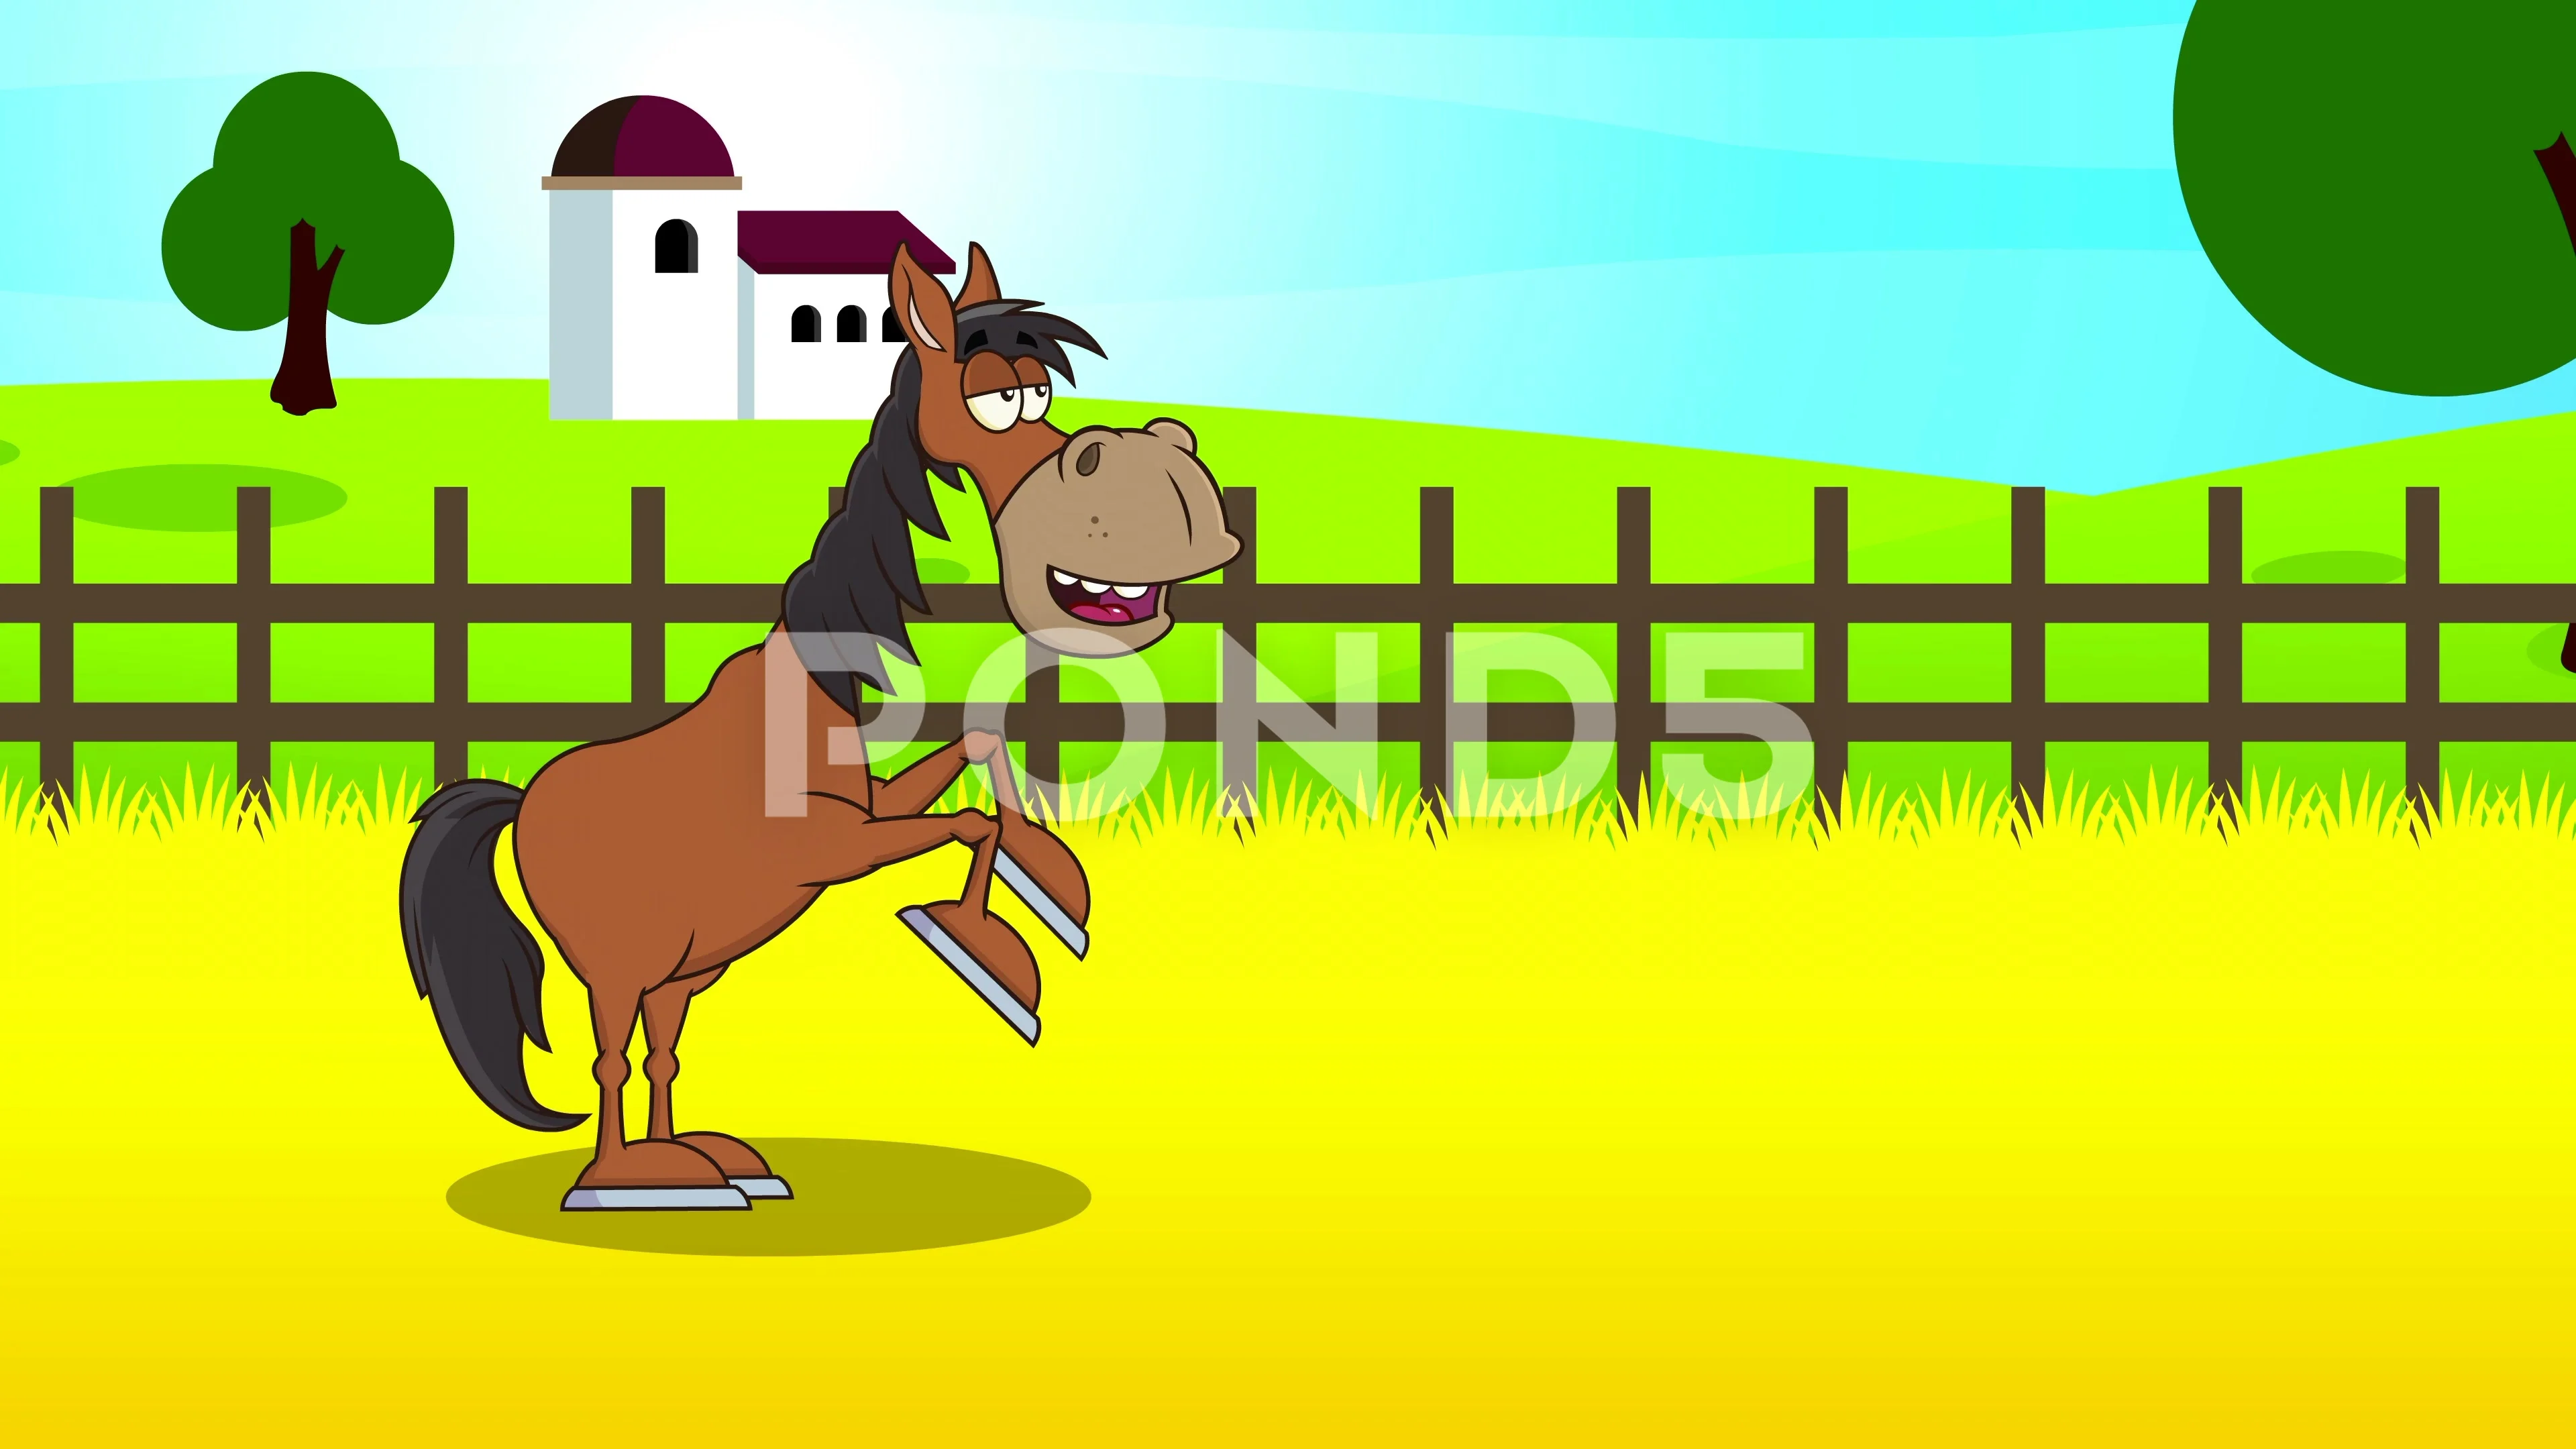 Animated Horse Running Stock Footage ~ Royalty Free Stock Videos | Pond5